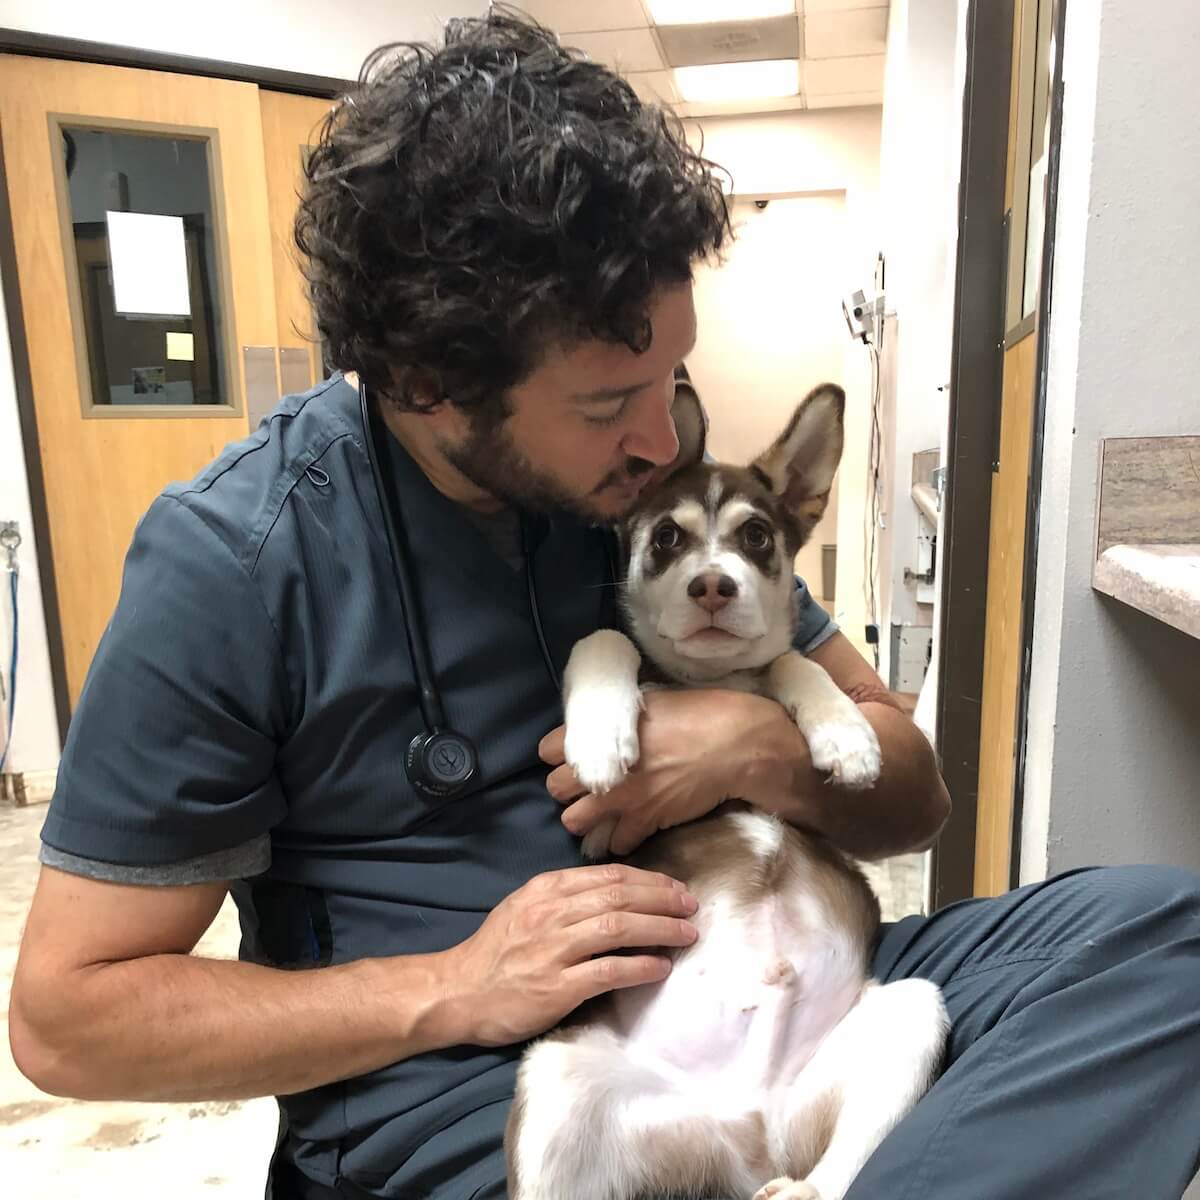 Dr. Davis with dog in lap